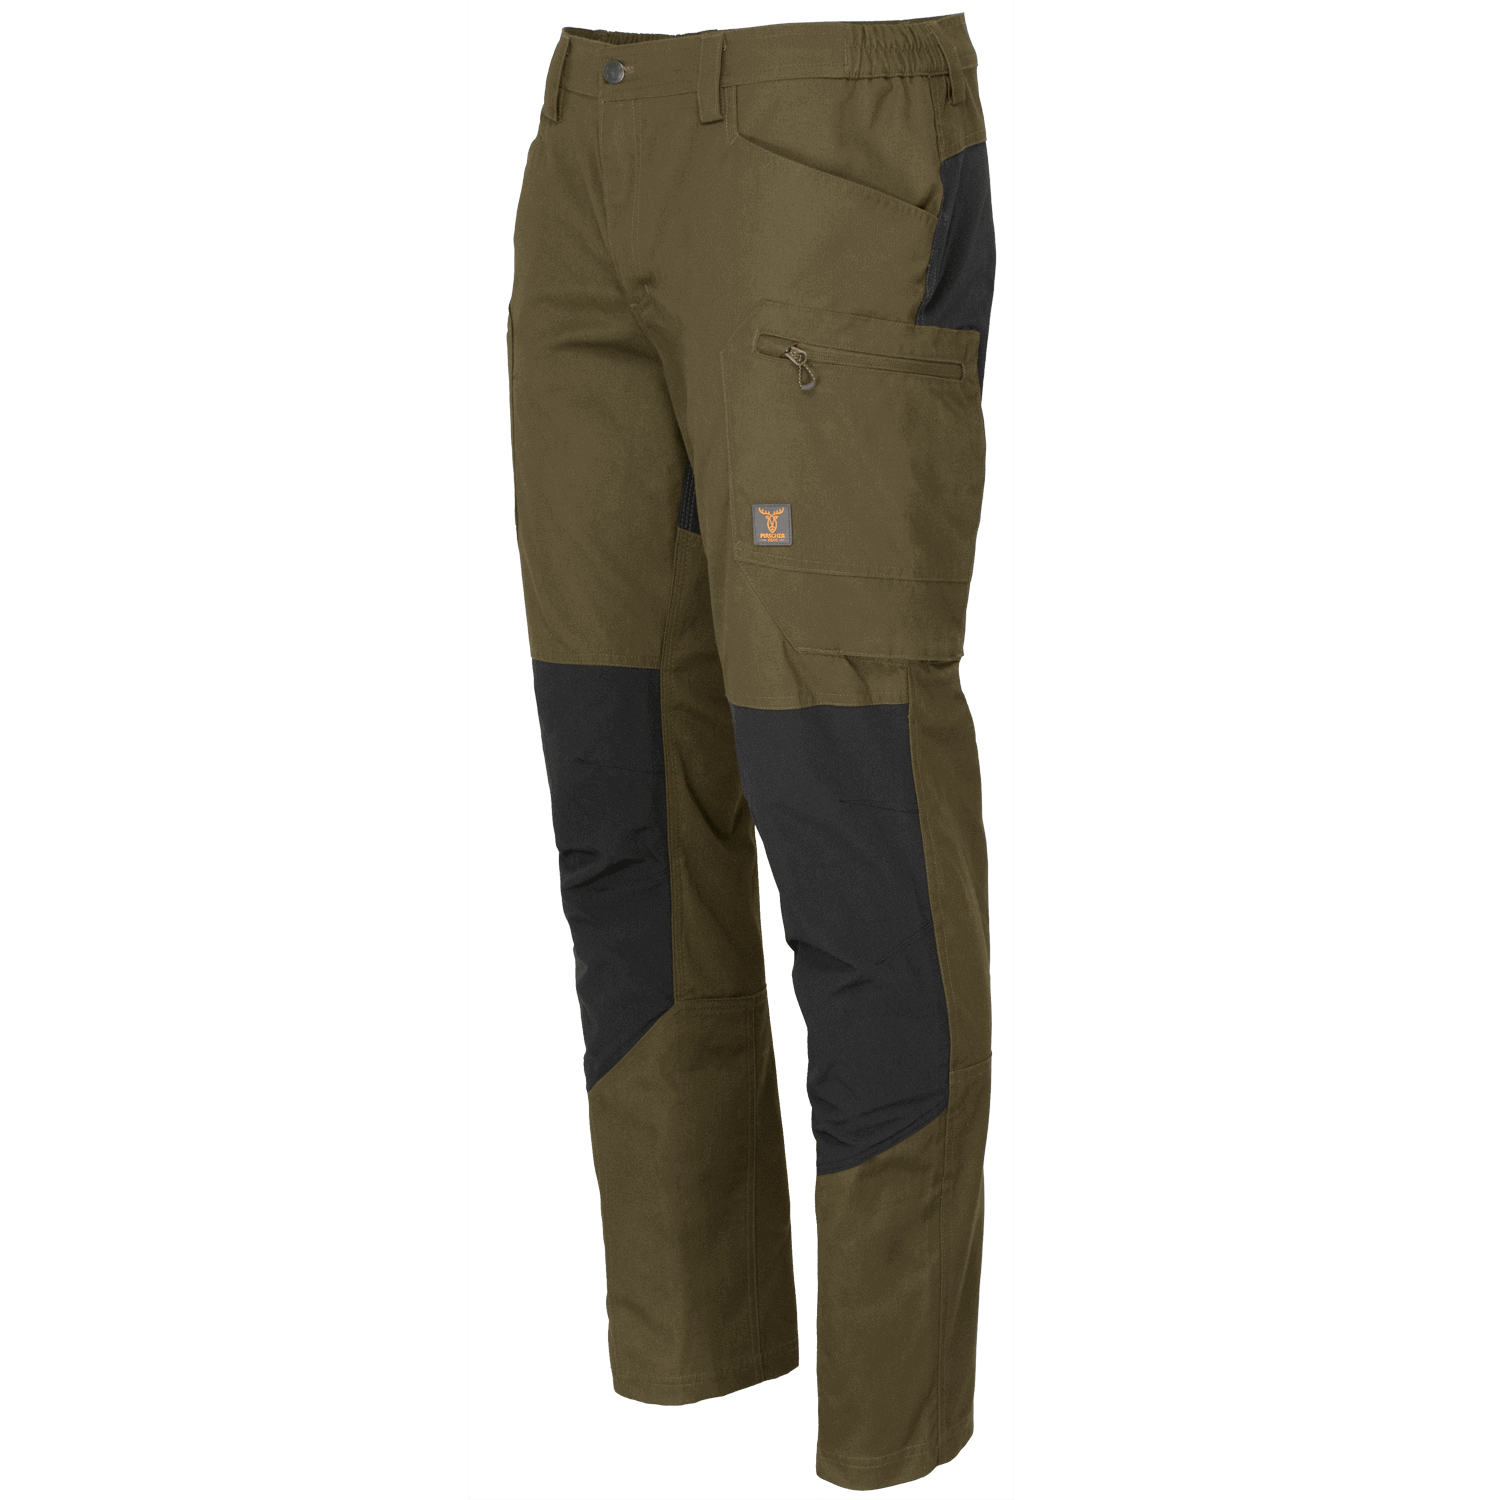 Pirscher Gear Territory Stretch Pants - Hunting Trousers